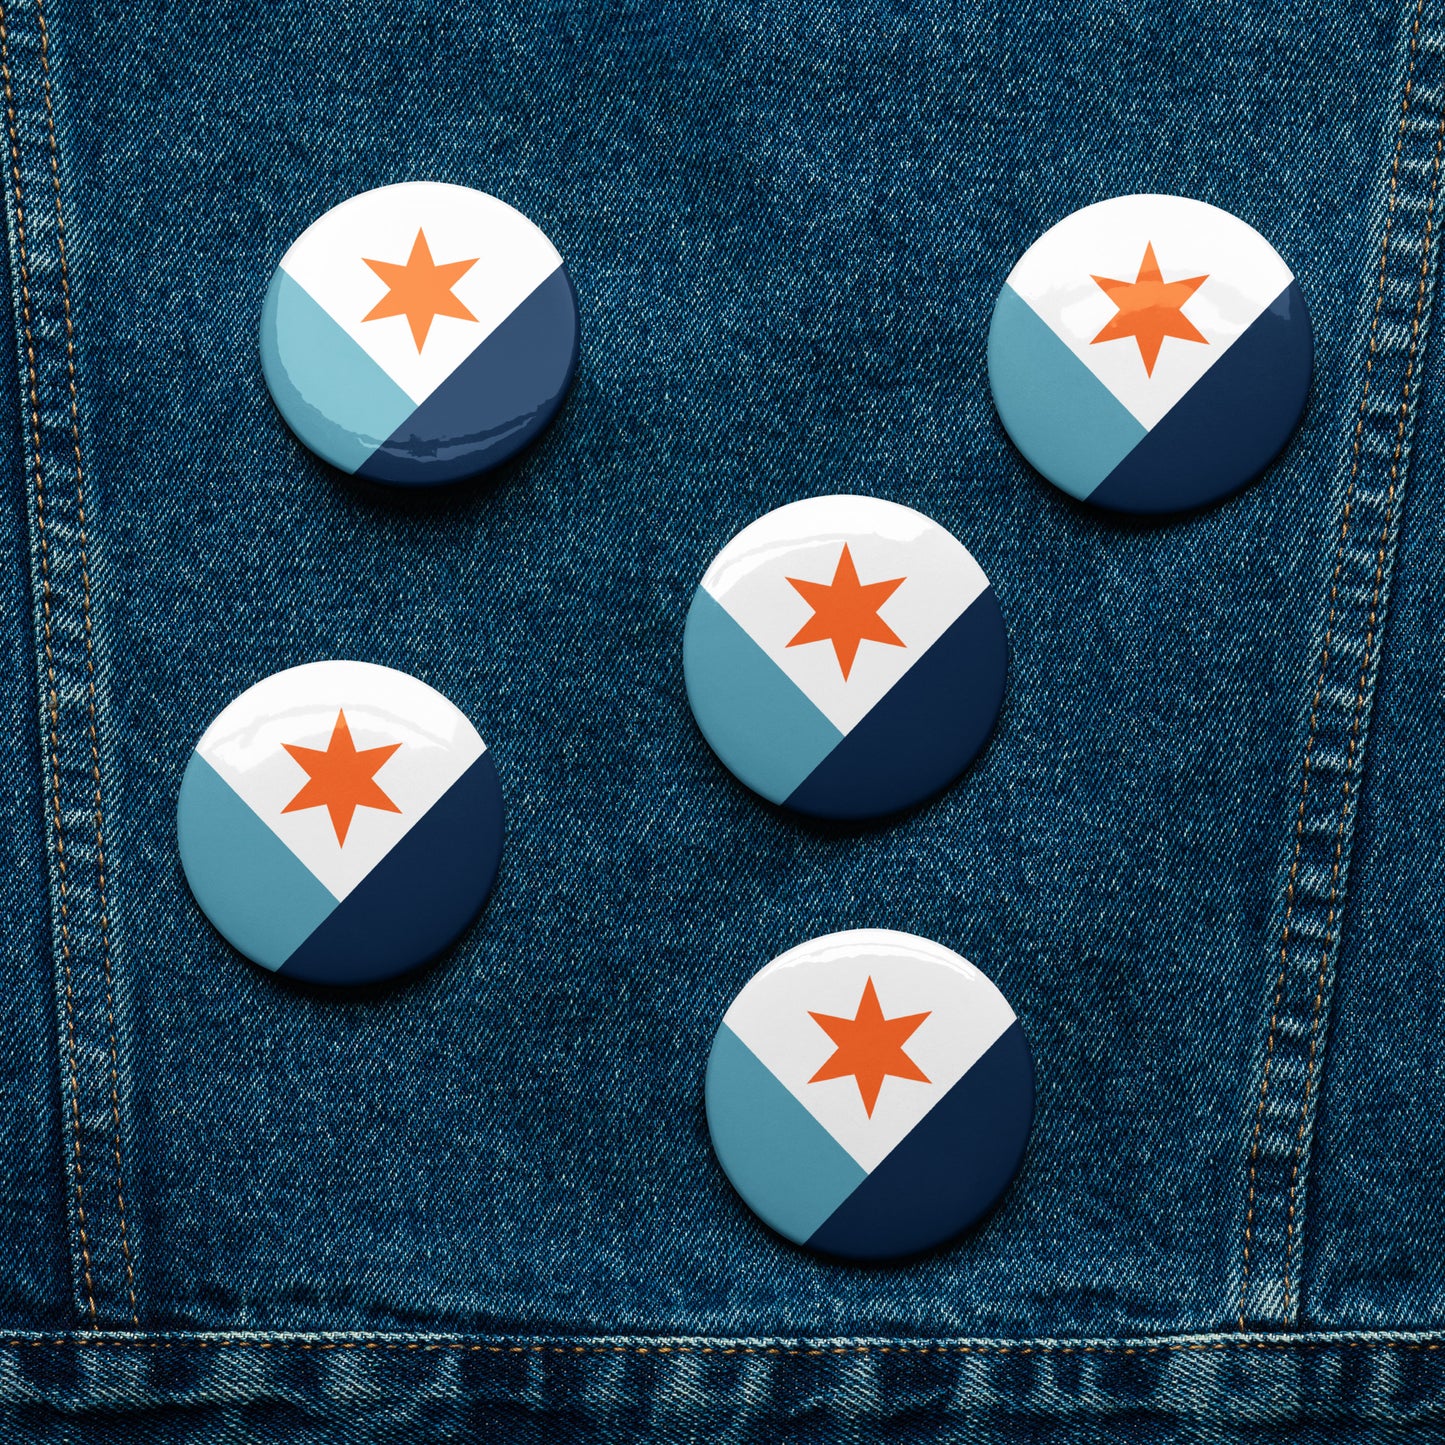 Five Syracuse, NY city flag button pins lying flat on a piece of denim fabric